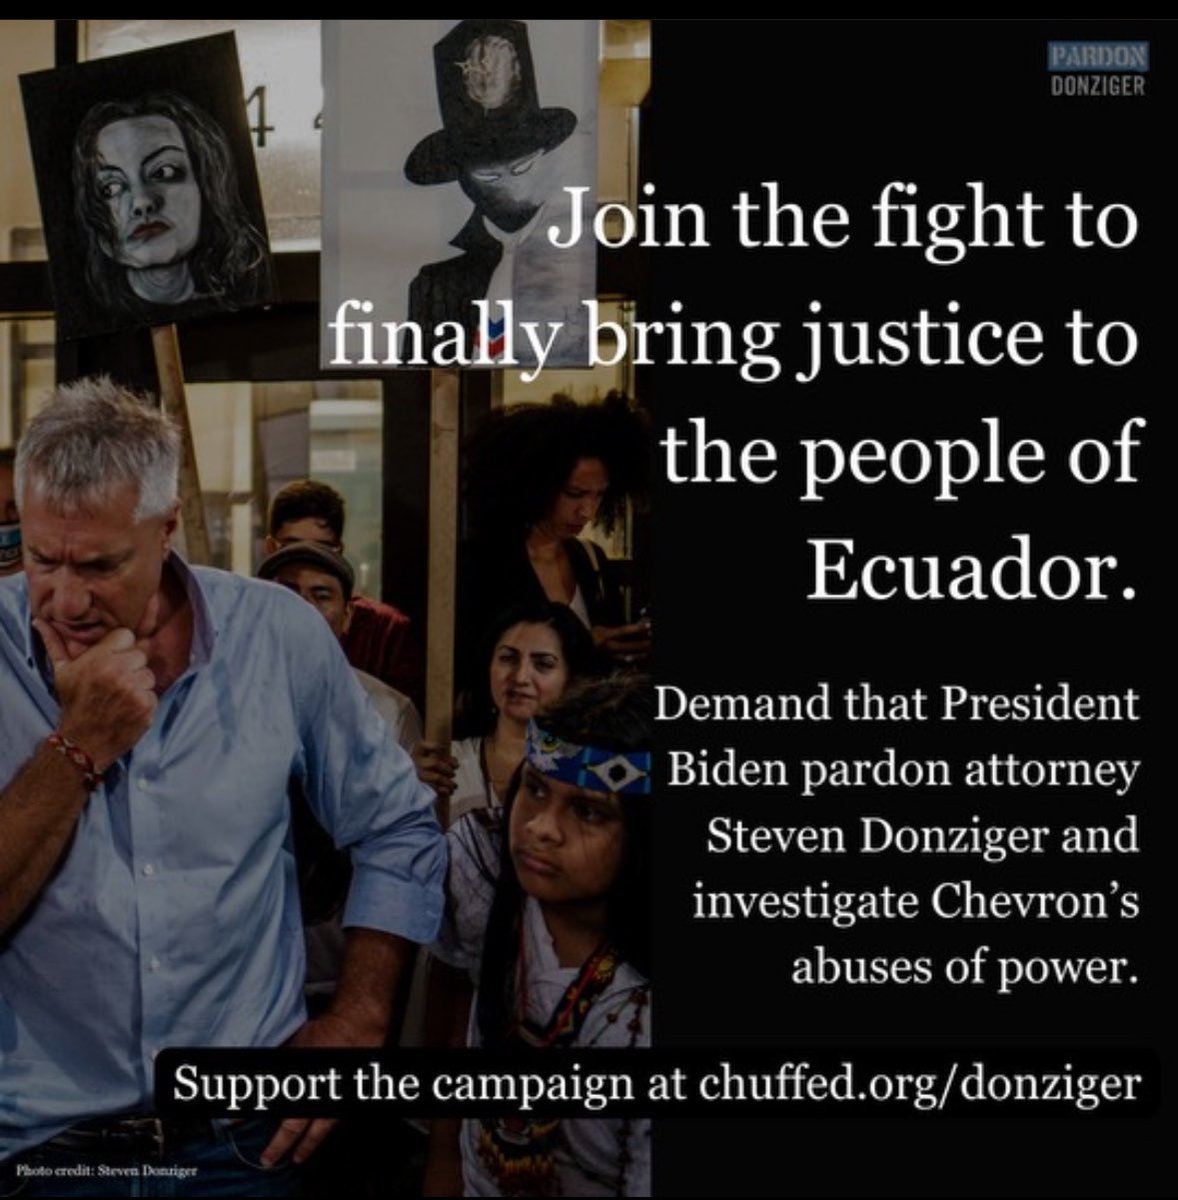 We are building a team of paradigm-shifting activists to force President Biden to nullify Chevron's illegal prosecution of me and correct a blatant miscarriage of justice. Biden also must act to stop the dying in Ecuador's Amazon due to Chevron's toxic dumping.⤵️